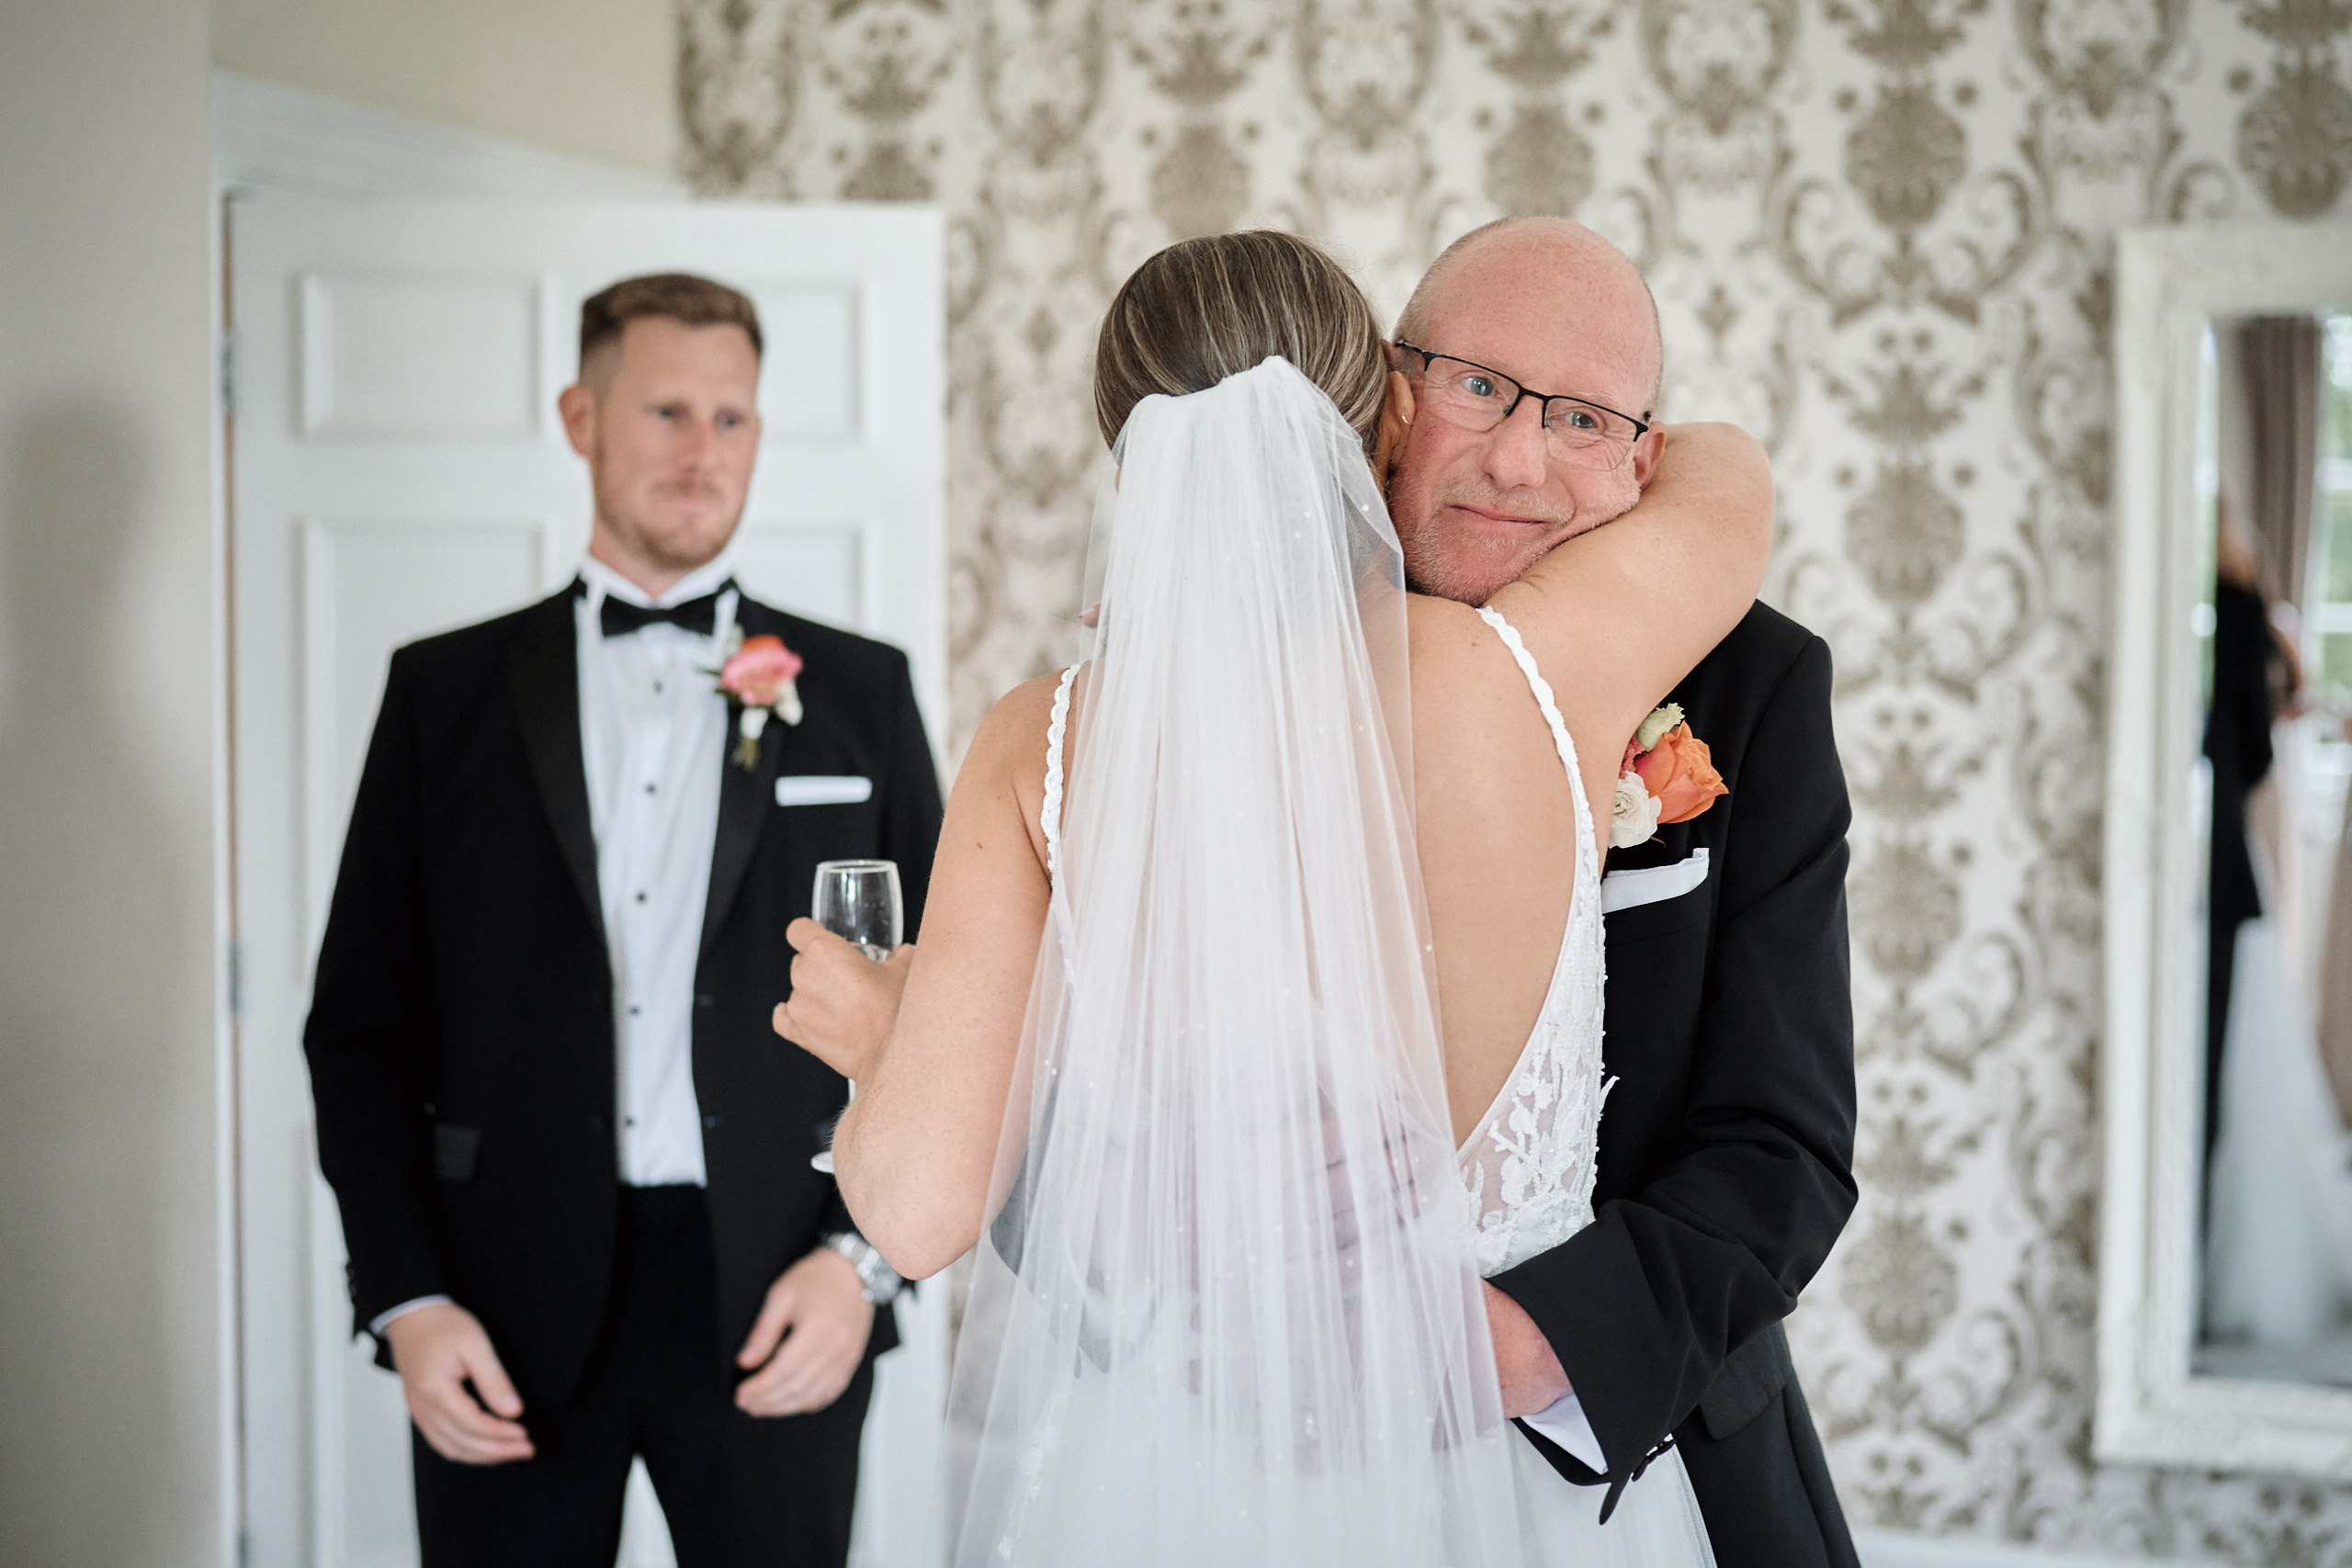 A bride and groom hugging in front of a mirror.